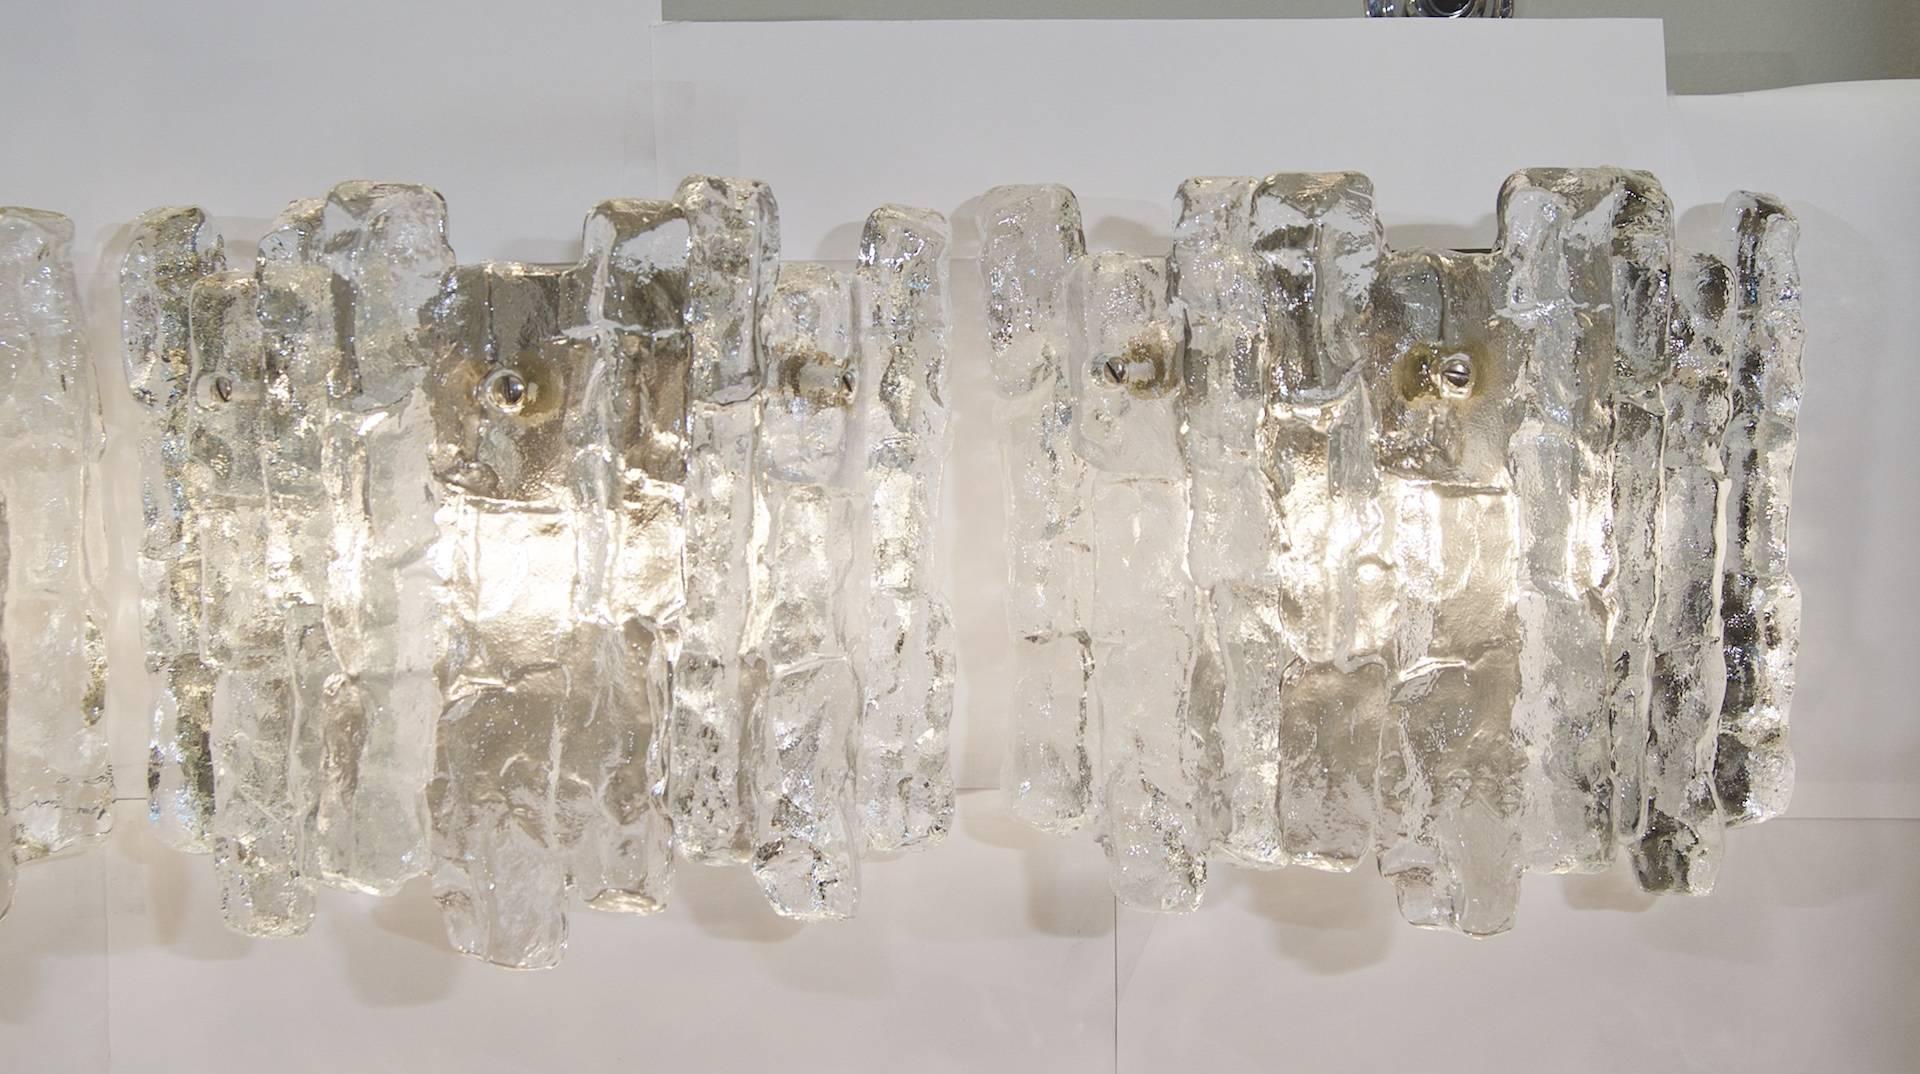 Excellent Kalmar ice glass wall sconces, each having three heavy pieces of ice glass.

Each takes two E-14 base bulbs up to 40 watts per bulb, pictured with 10 watt bulbs. New wiring.

Price is per pair. Three pairs total available.